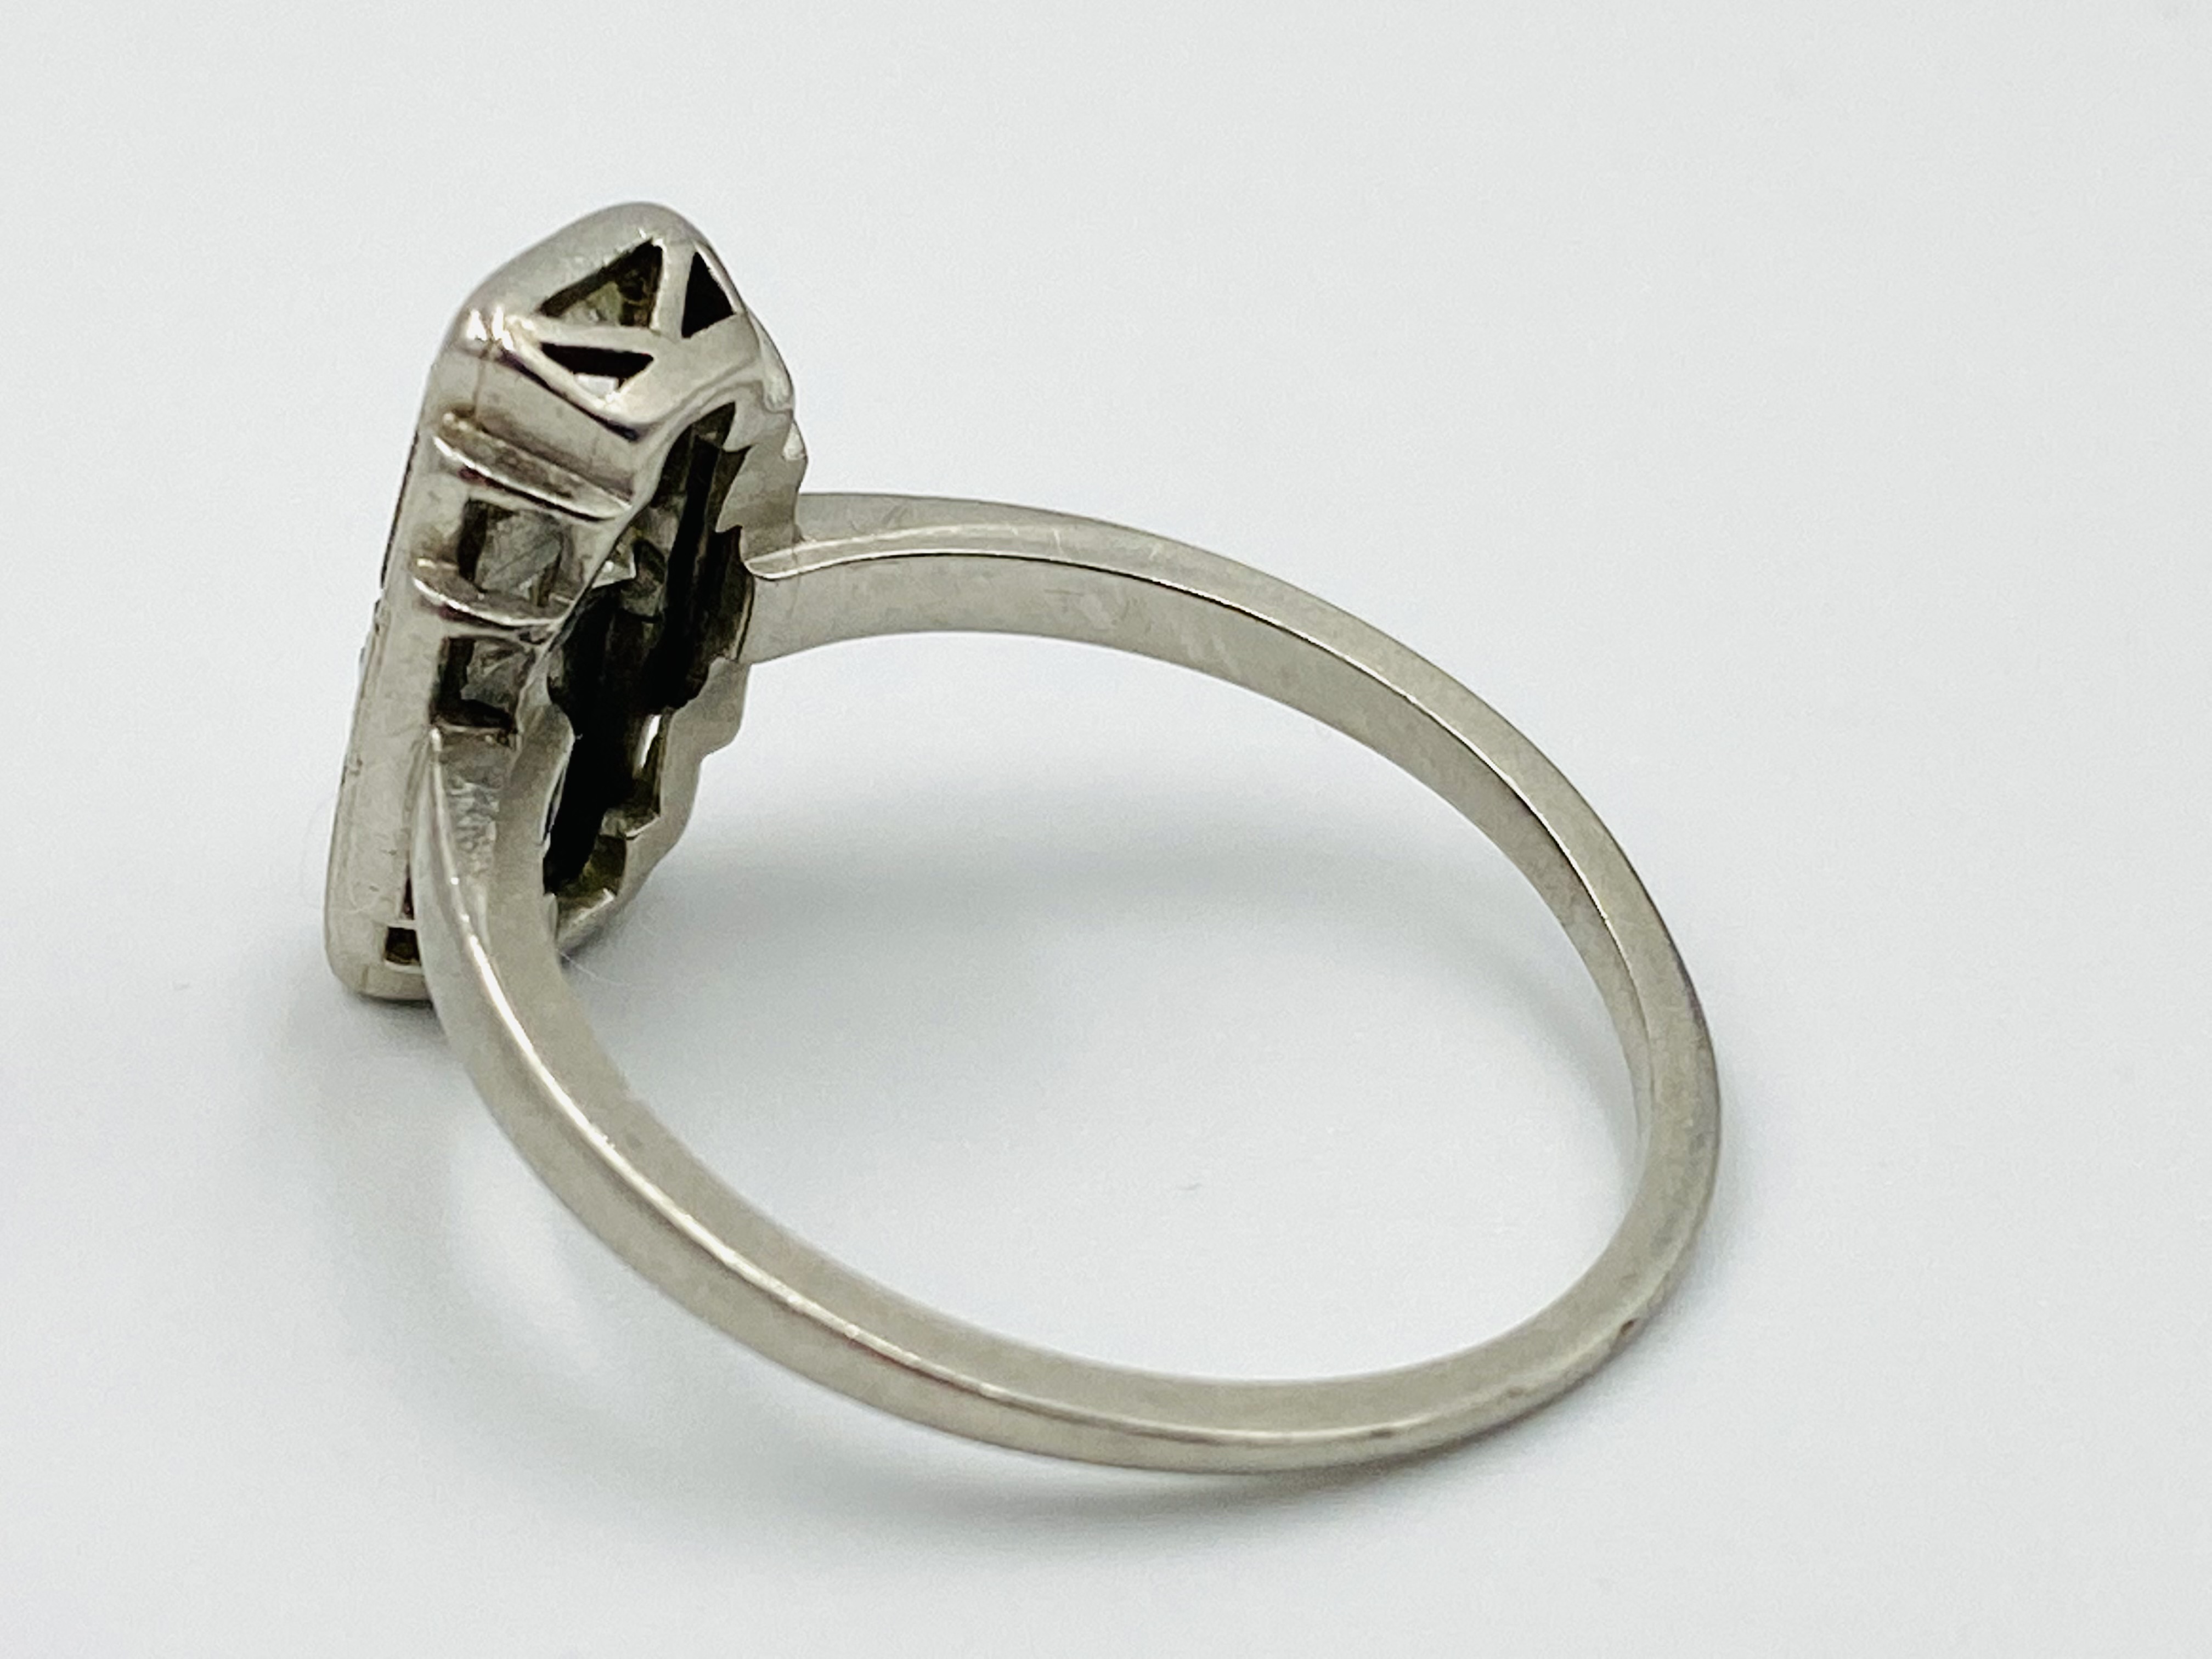 Art deco style platinum and diamond two stone ring - Image 3 of 6